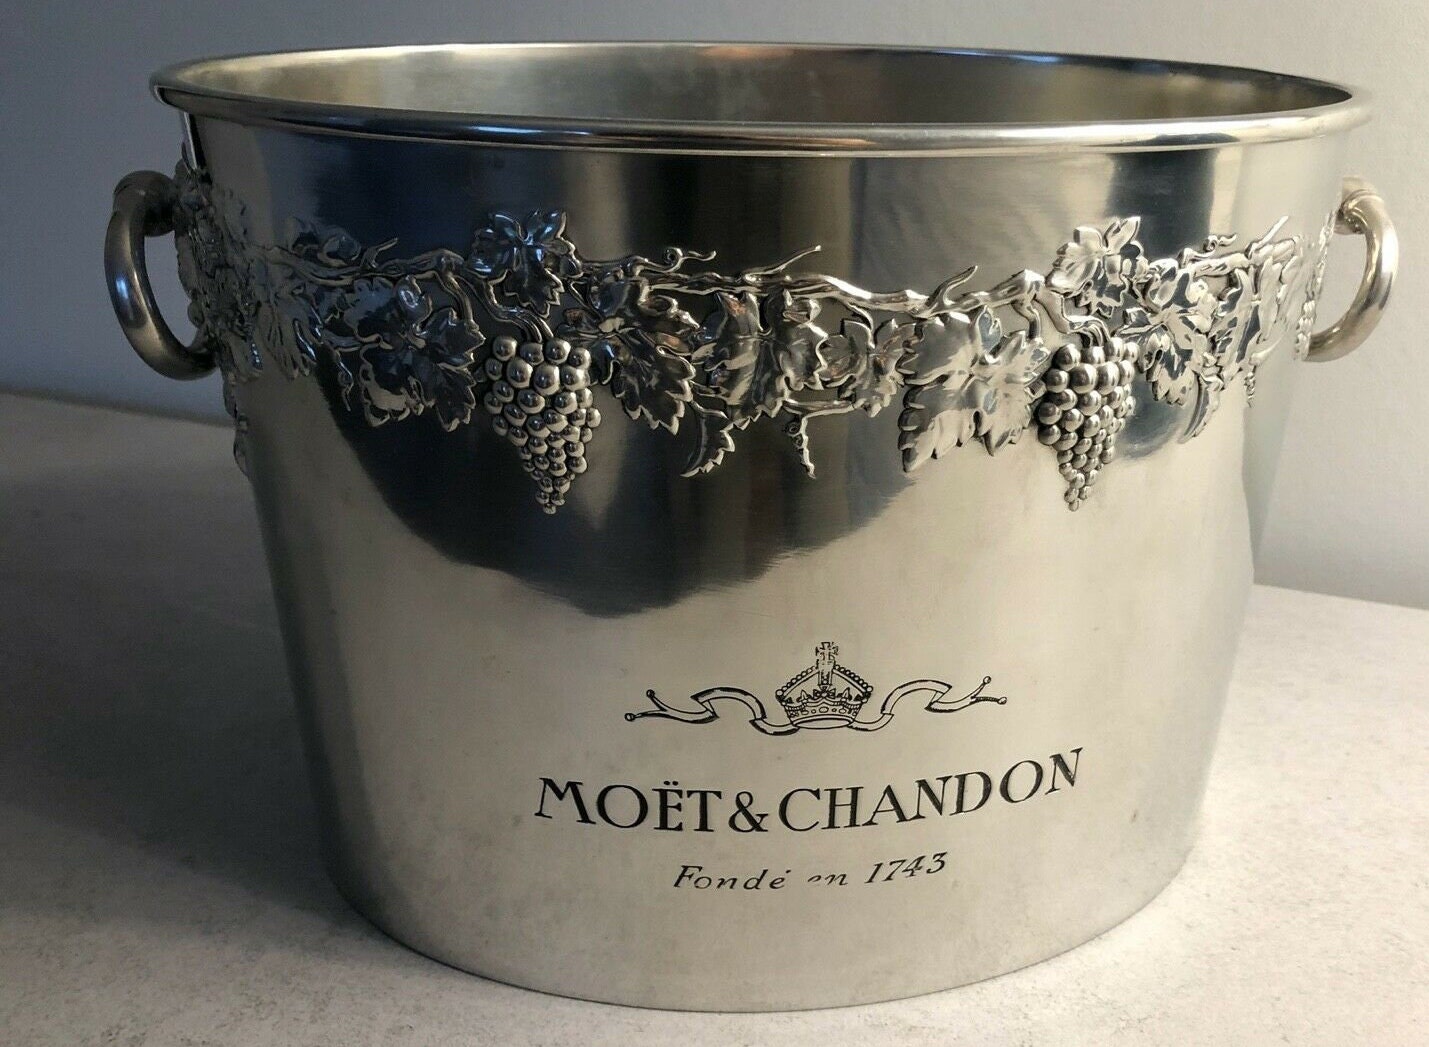 A Moët & Chandon champagne cooler in white metal, made by Argit in  France, 20th century. - Bukowskis